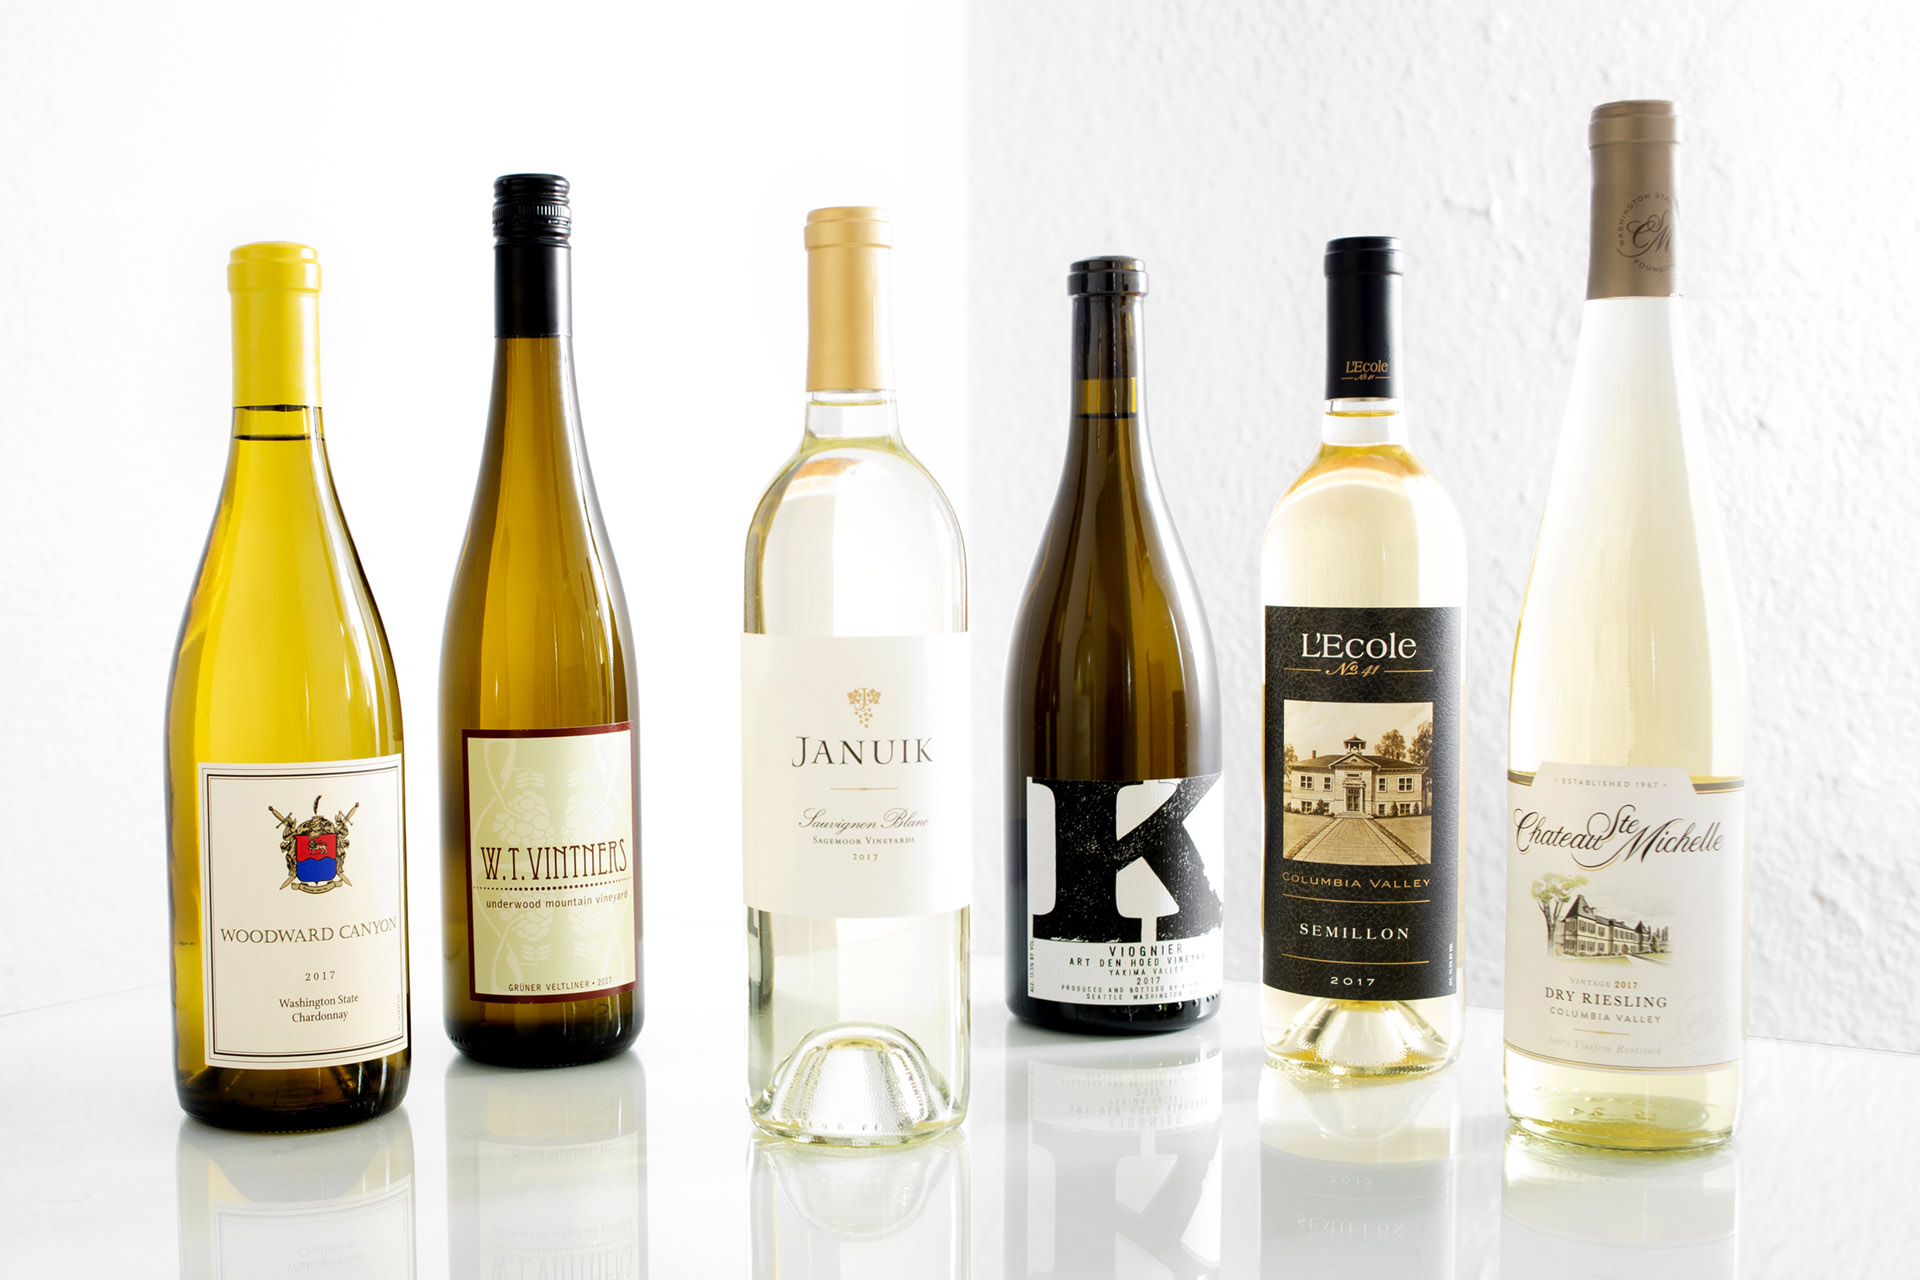 Washington’s White Wine Paradox Often overshadowed by the state's reds, the 2017 vintage shows it's time to pay attention to Washington's white wines.